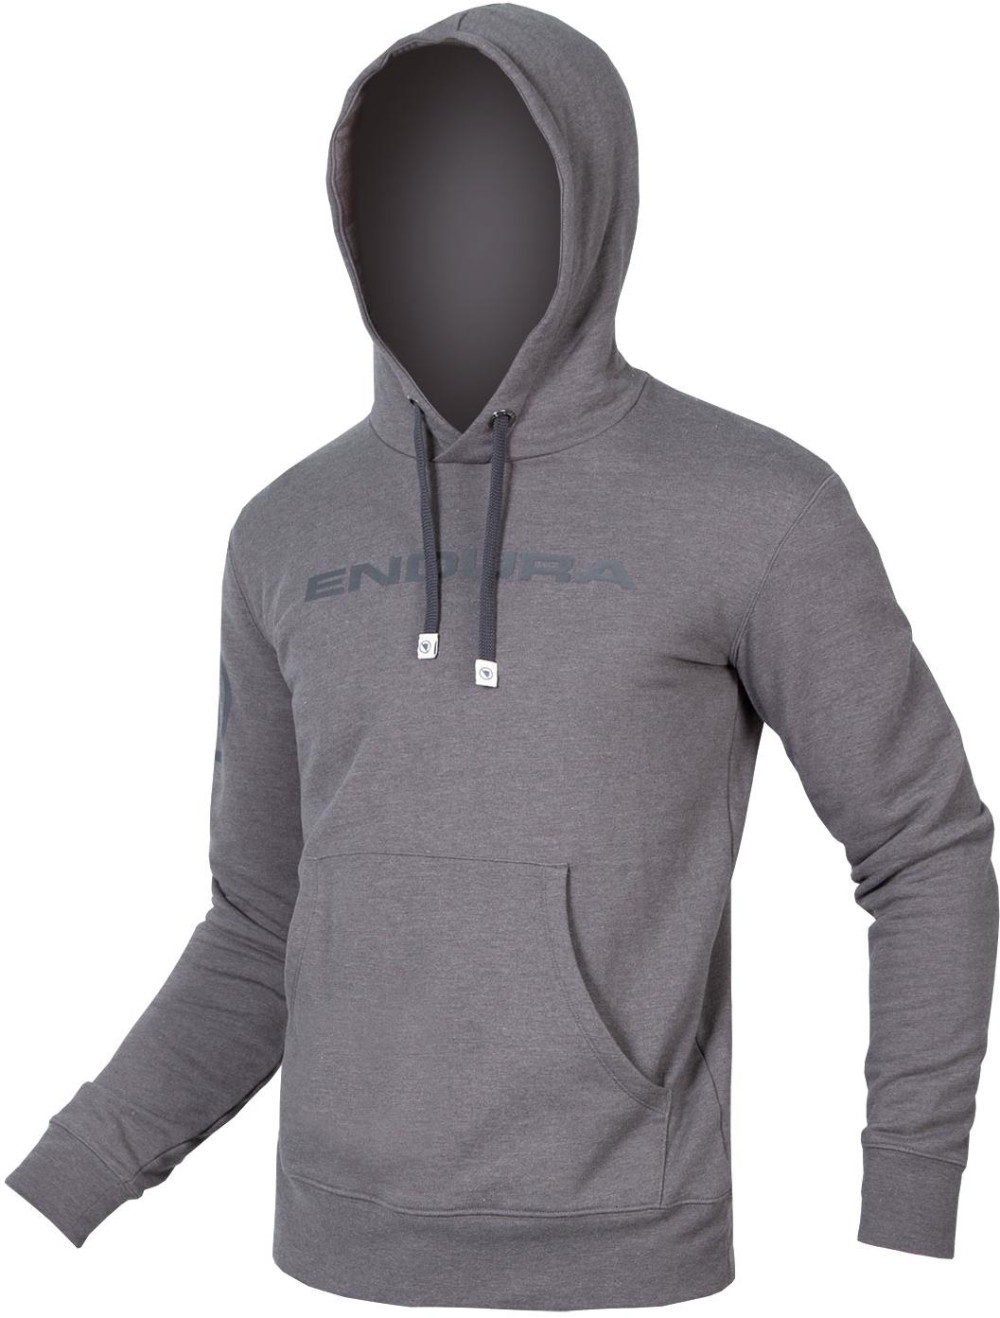 One Clan Cycling Pull Over Hoodie image 0